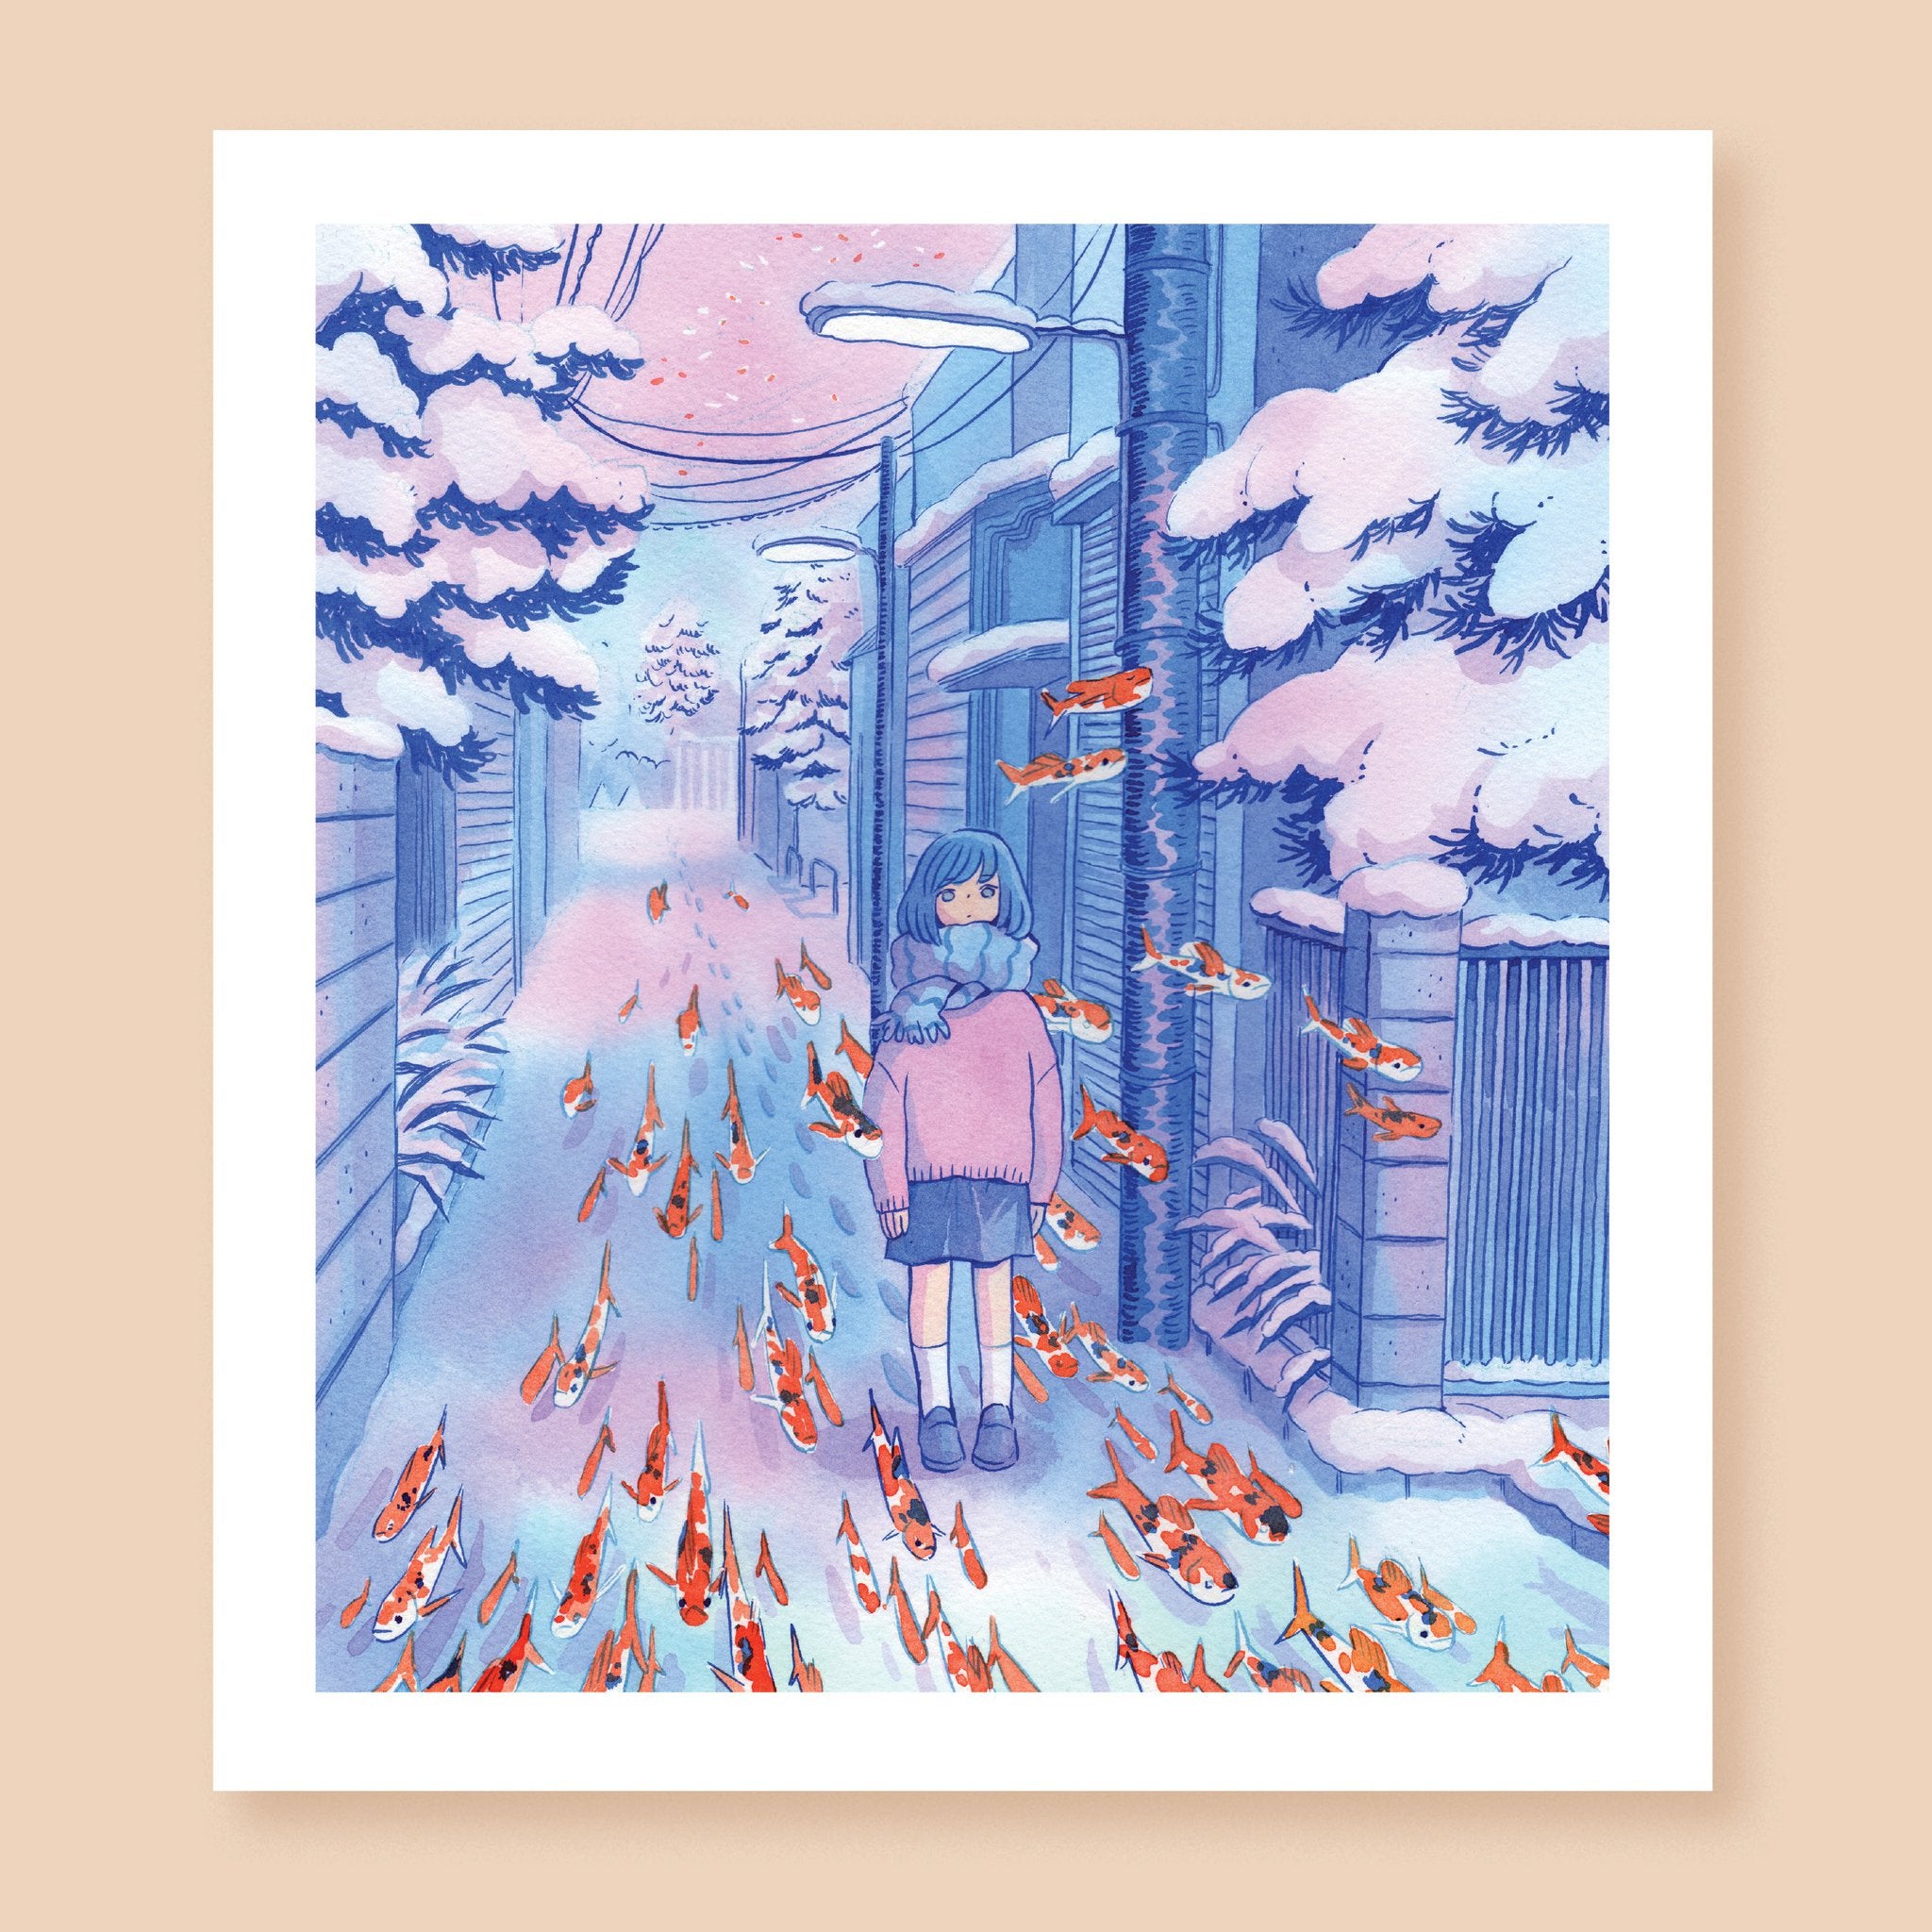 Print of a colored ink artwork depicting a character standing on a wintery street surrounded by snow-covered trees, in a dreamlike blue-and-pink scene. By their feet a stream of koi fish, splattered in orange, black, and white, swim through the air down the street.